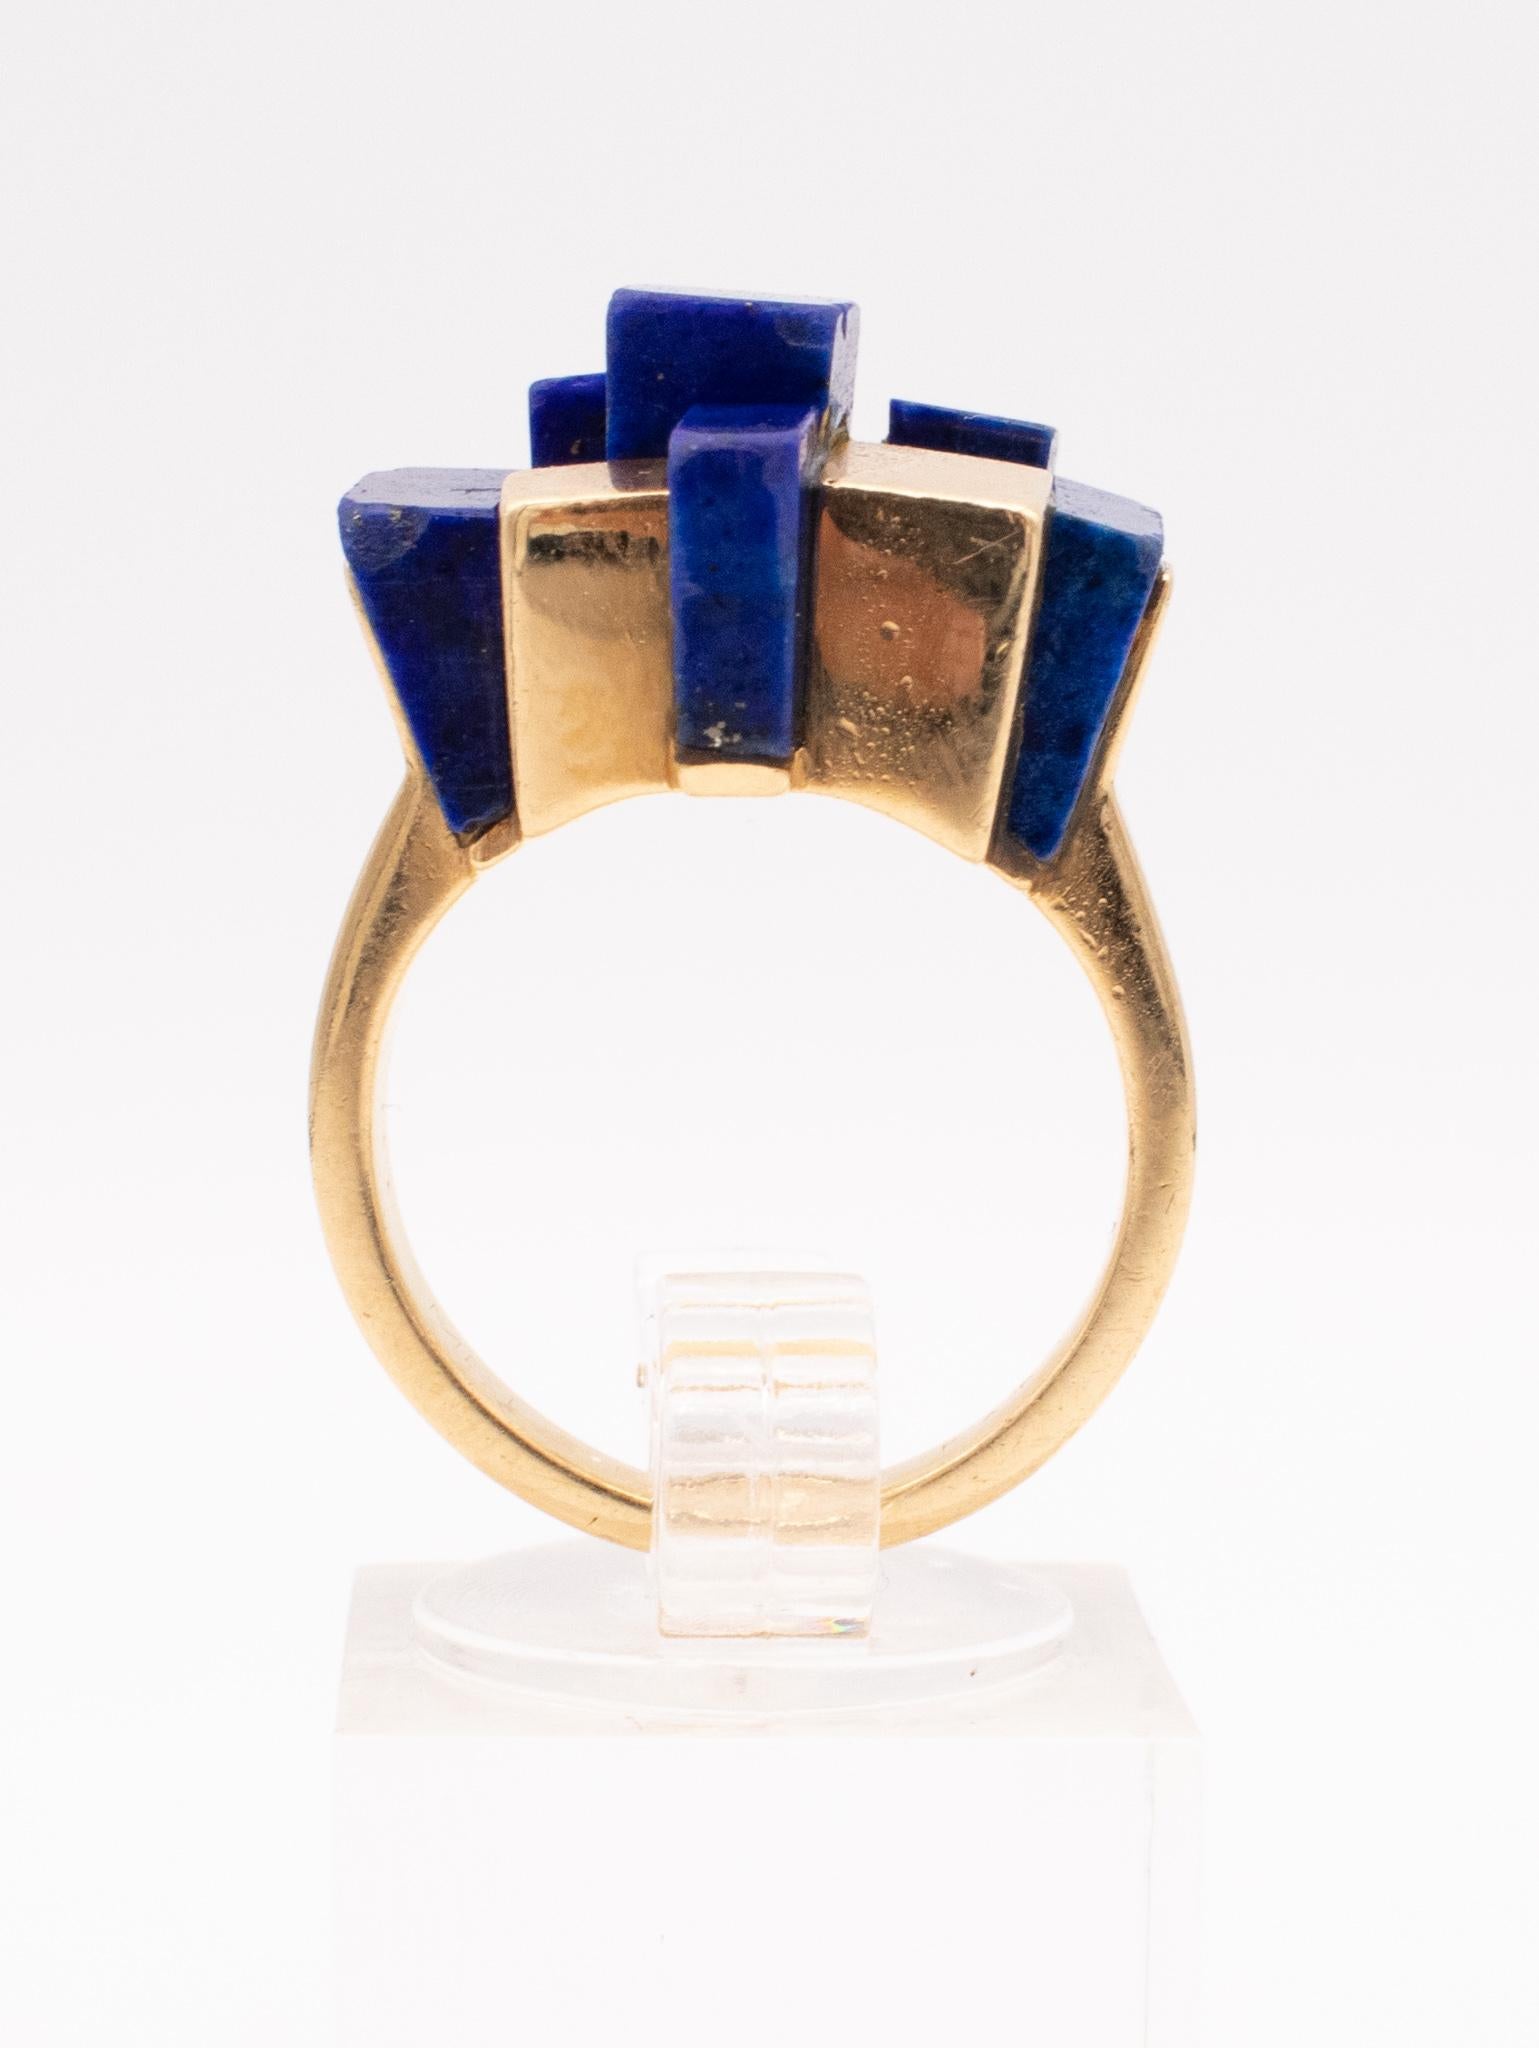 Mellerio 1970 Paris Rare Geometric 18Kt Yellow Gold Ring With Carved Lapis Lazul 2